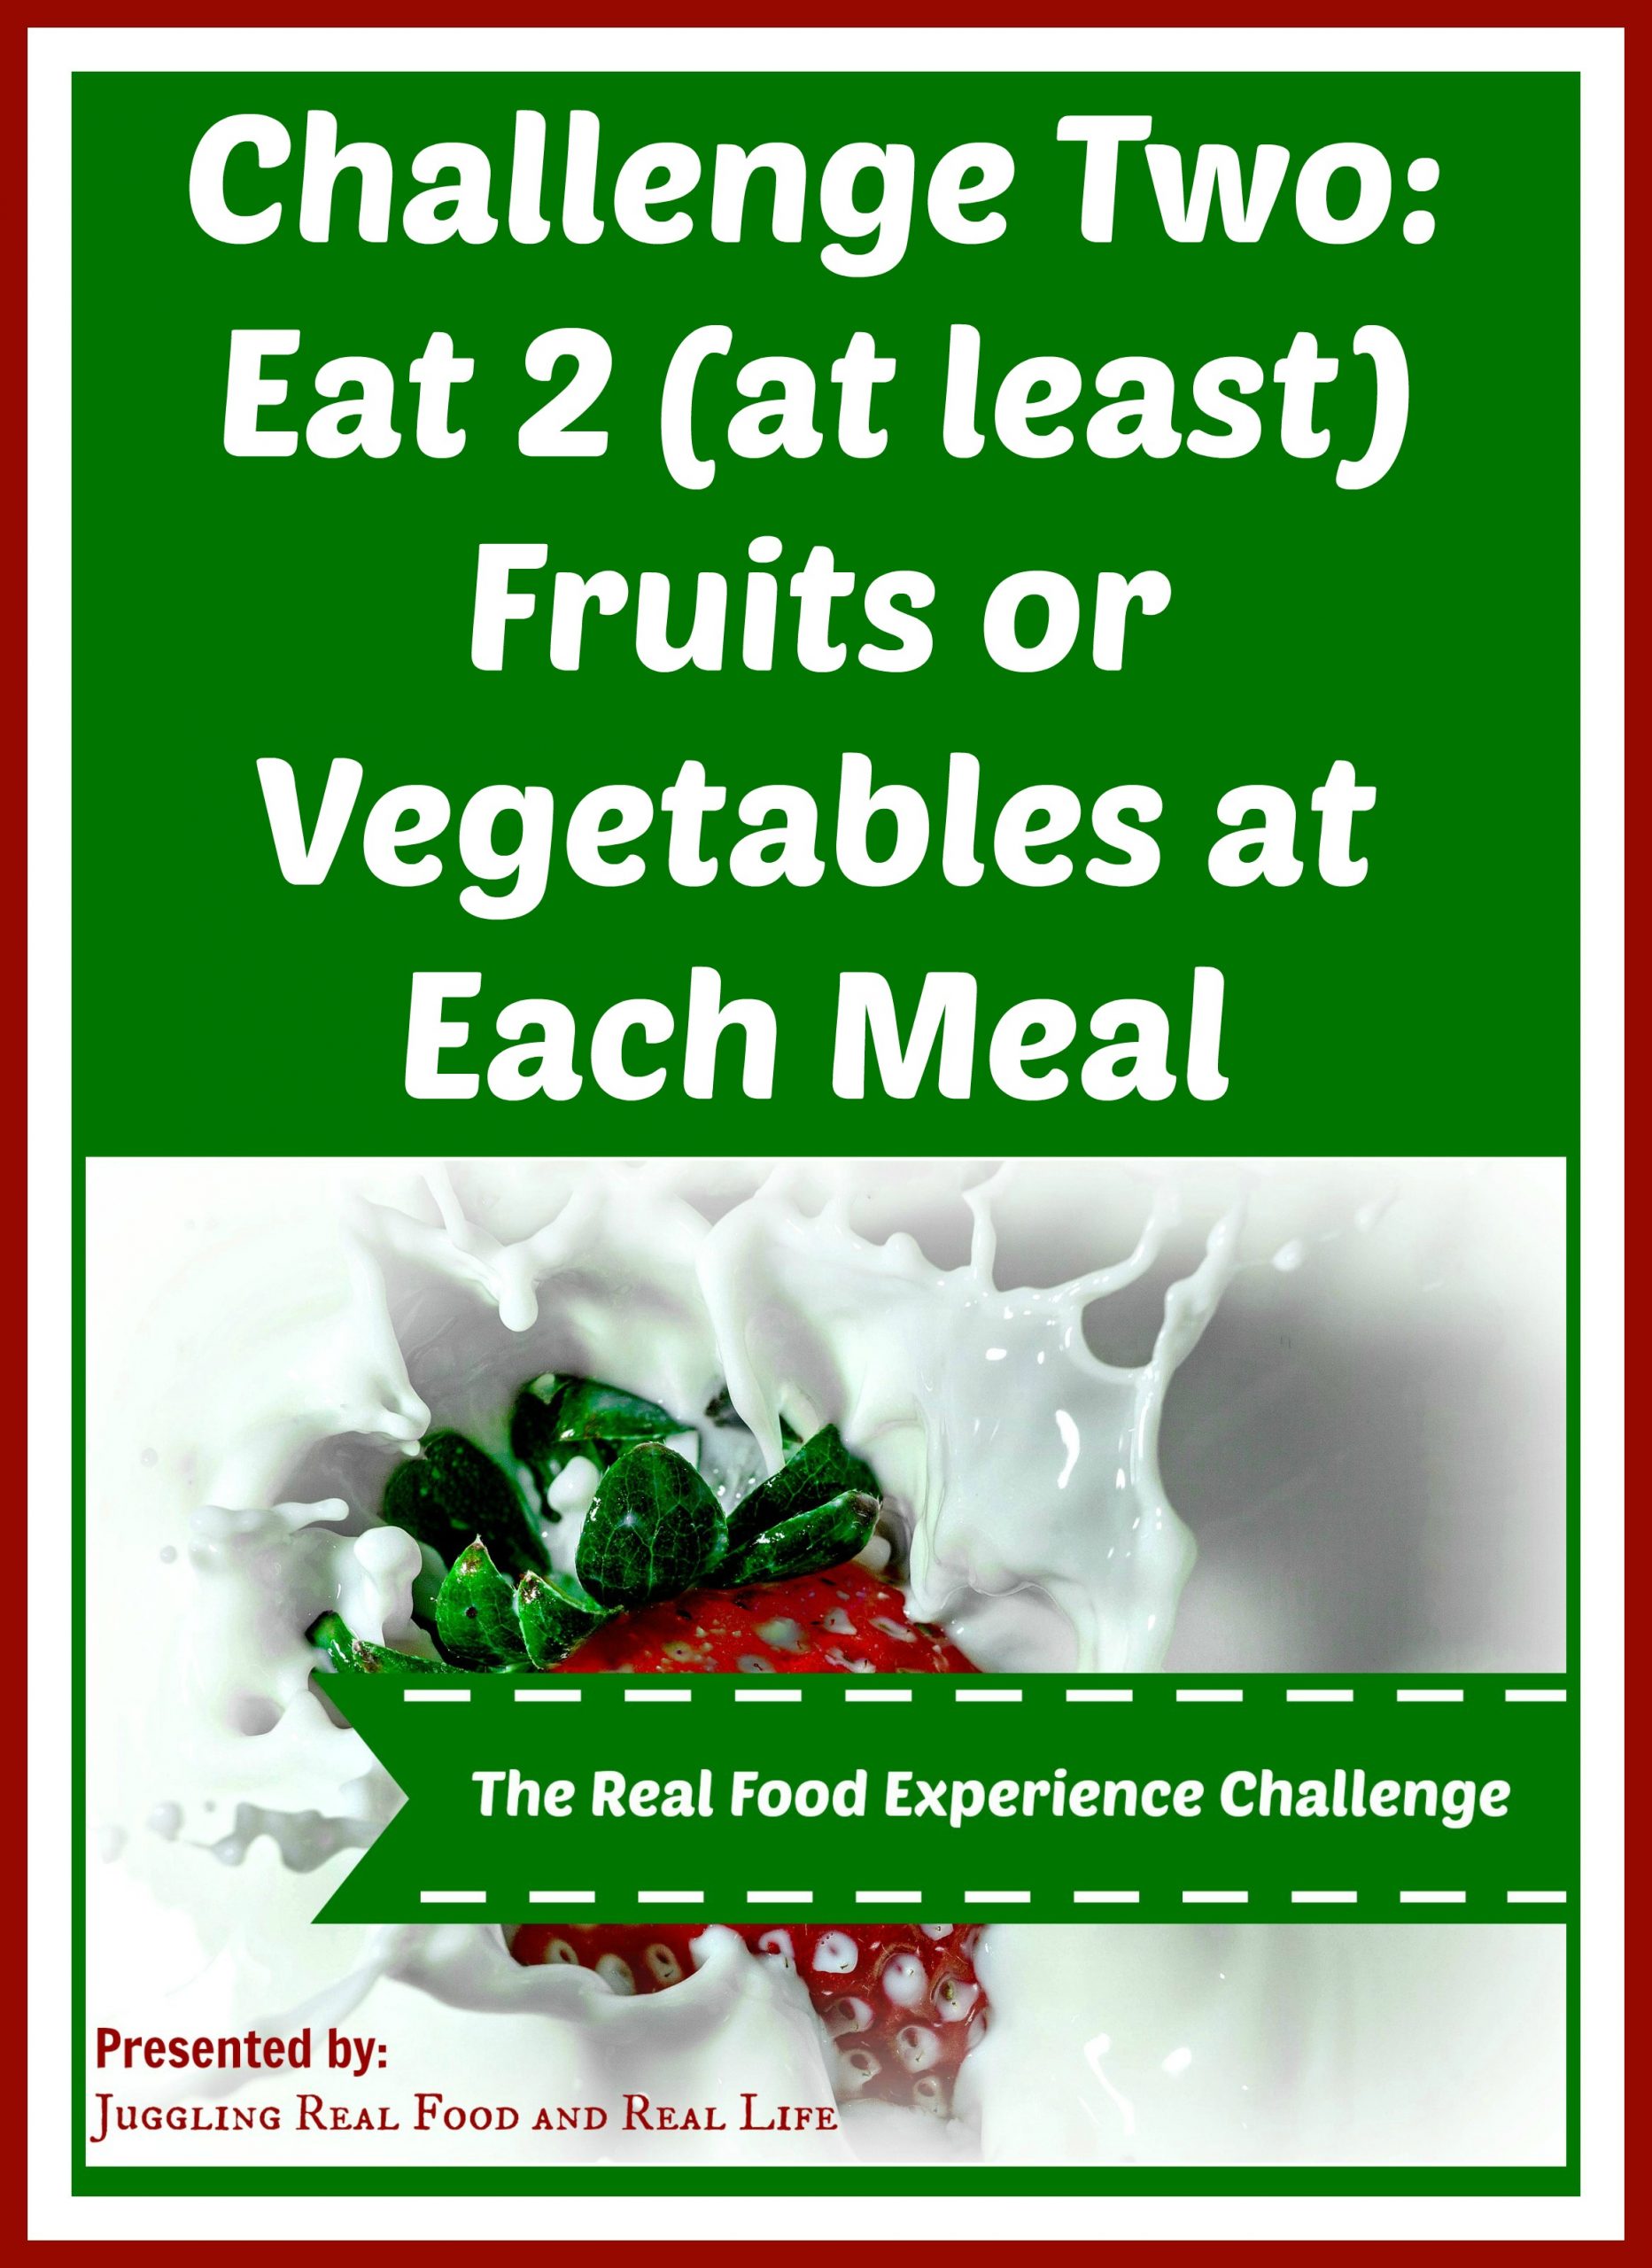 The Real Food Experience Challenge: Eat 2 Fruits or Vegetables at Each Meal